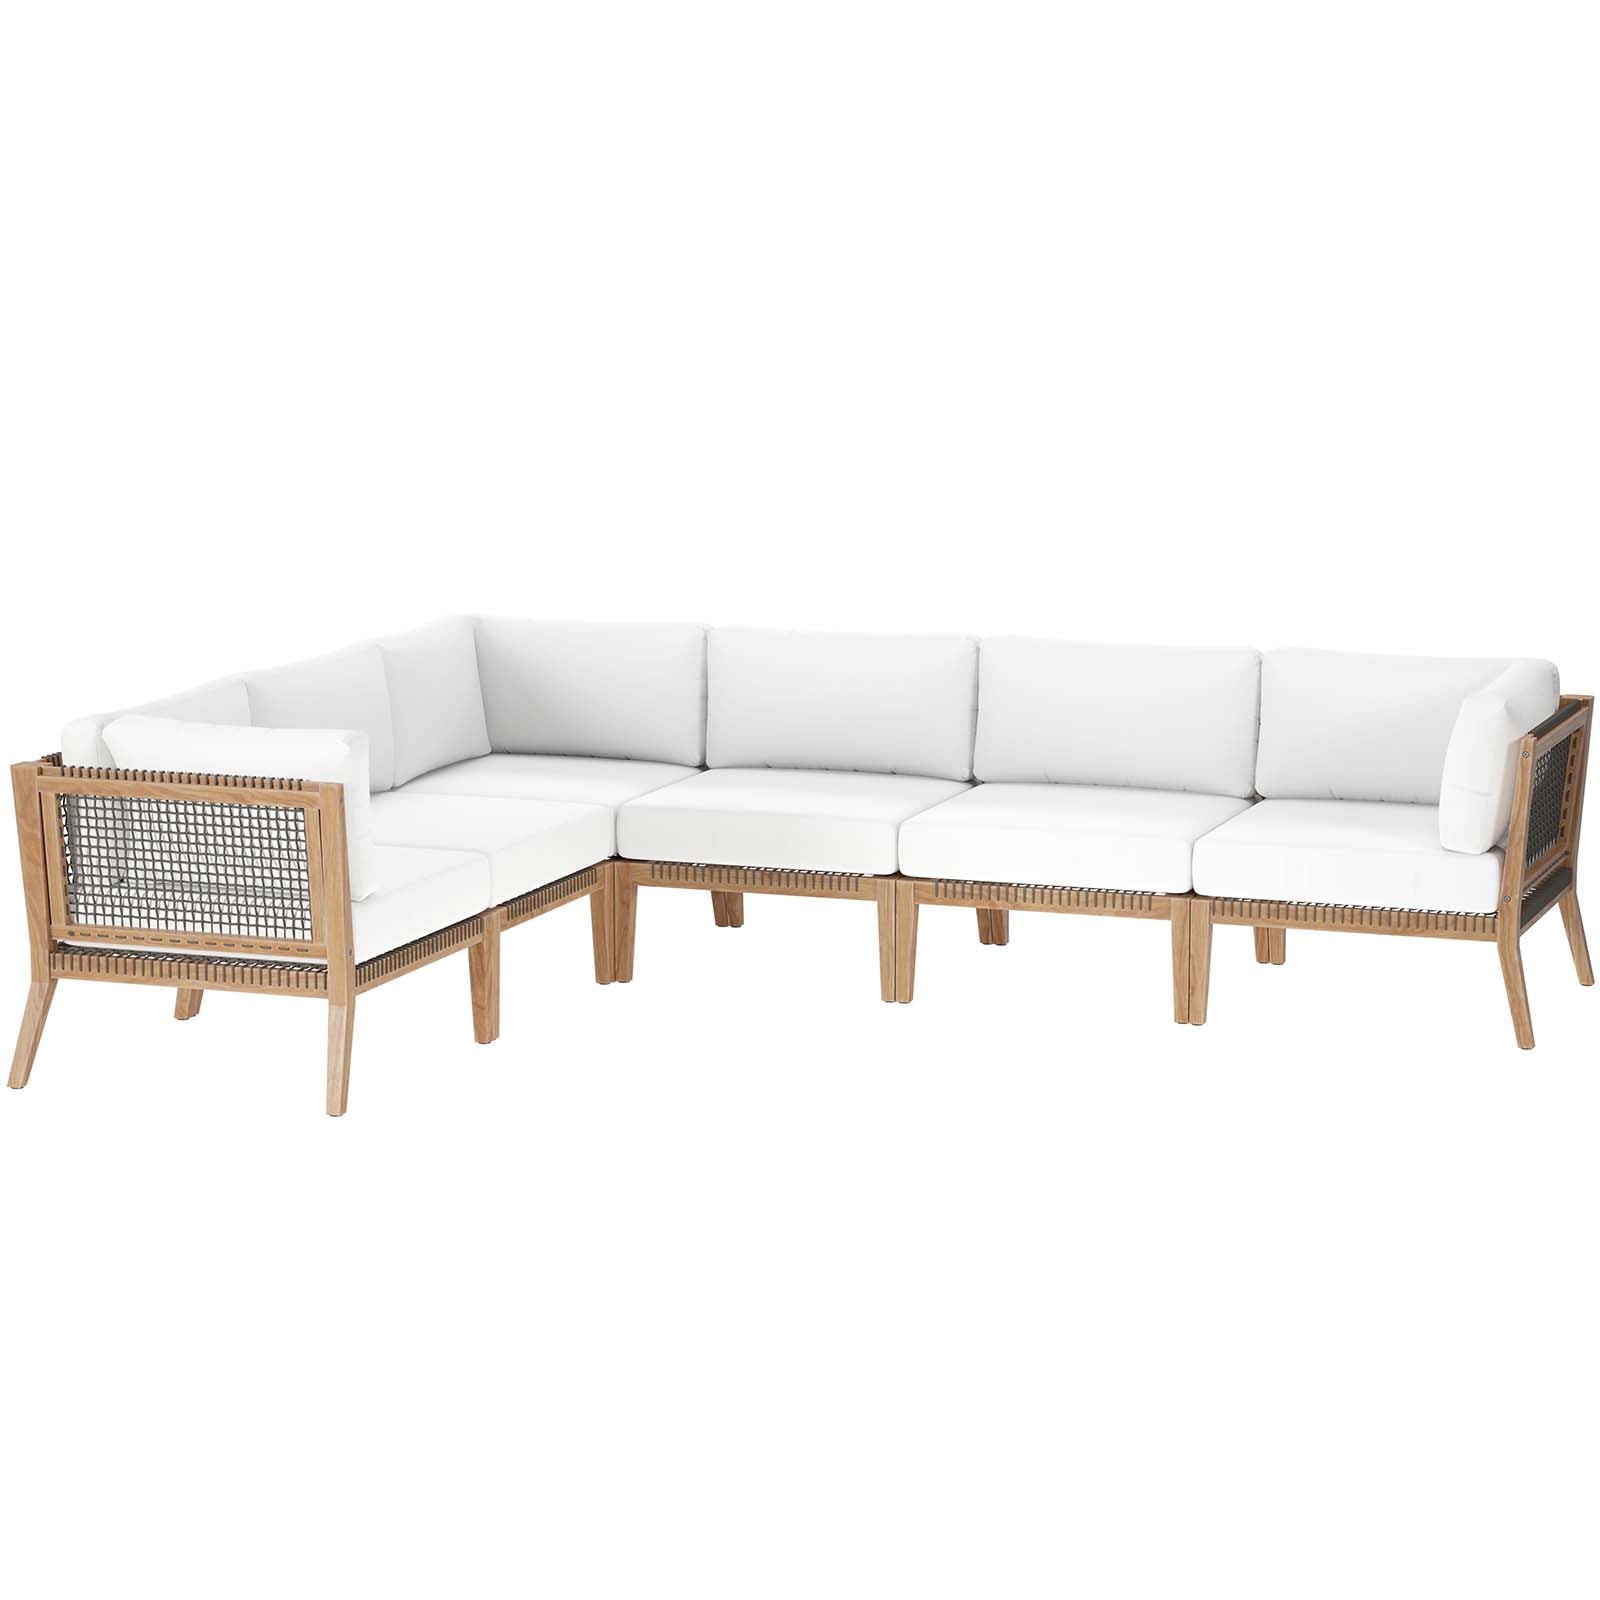 Modway Outdoor Sofas - Clearwater-Outdoor-Patio-Teak-Wood-6-Piece-Sectional-Sofa-Gray-White